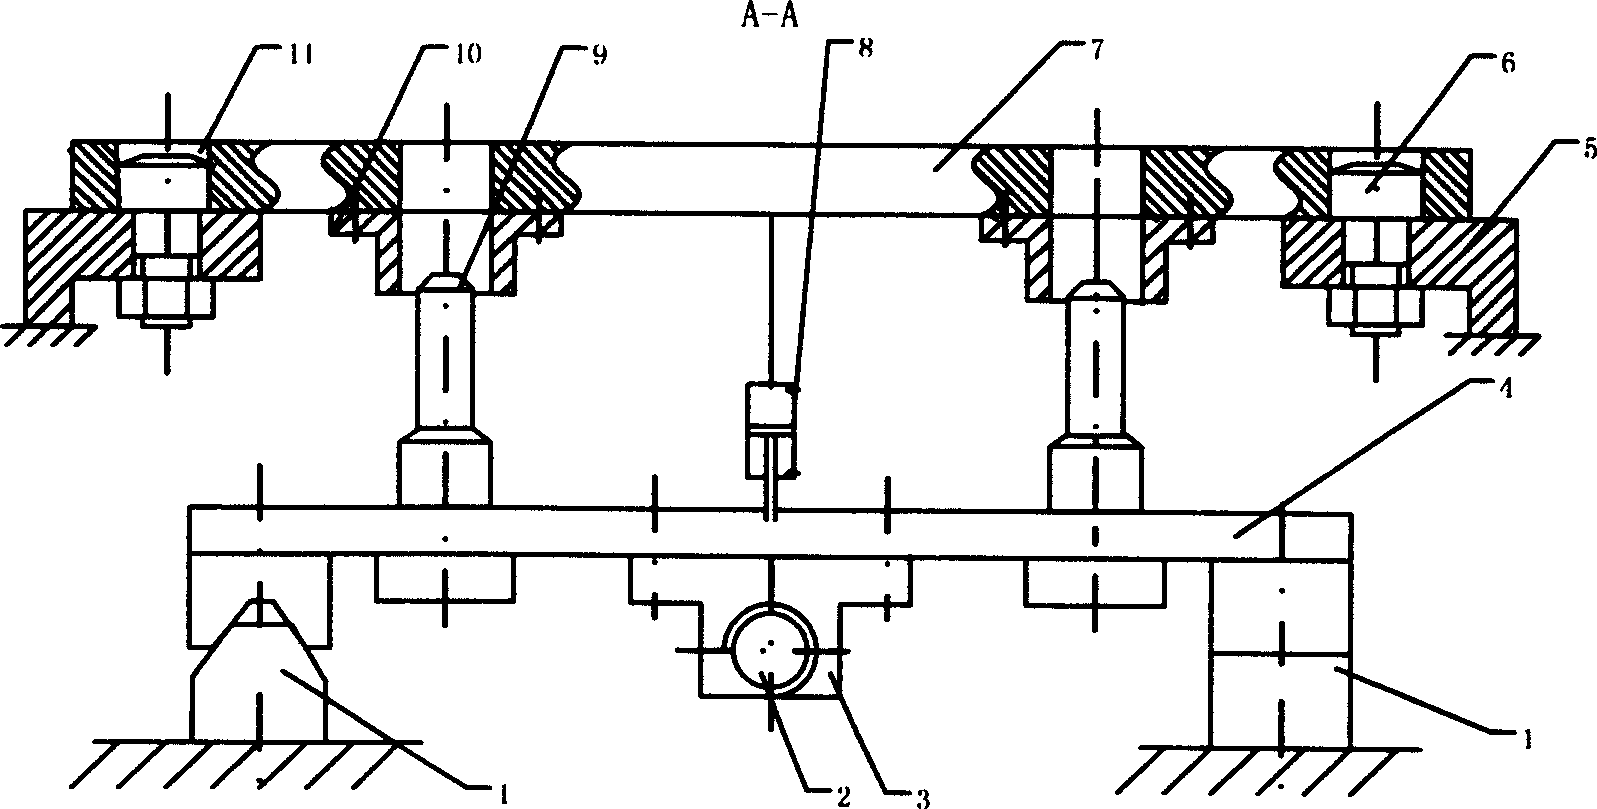 Precisively positioning mechanism without interferes in multiposition process system